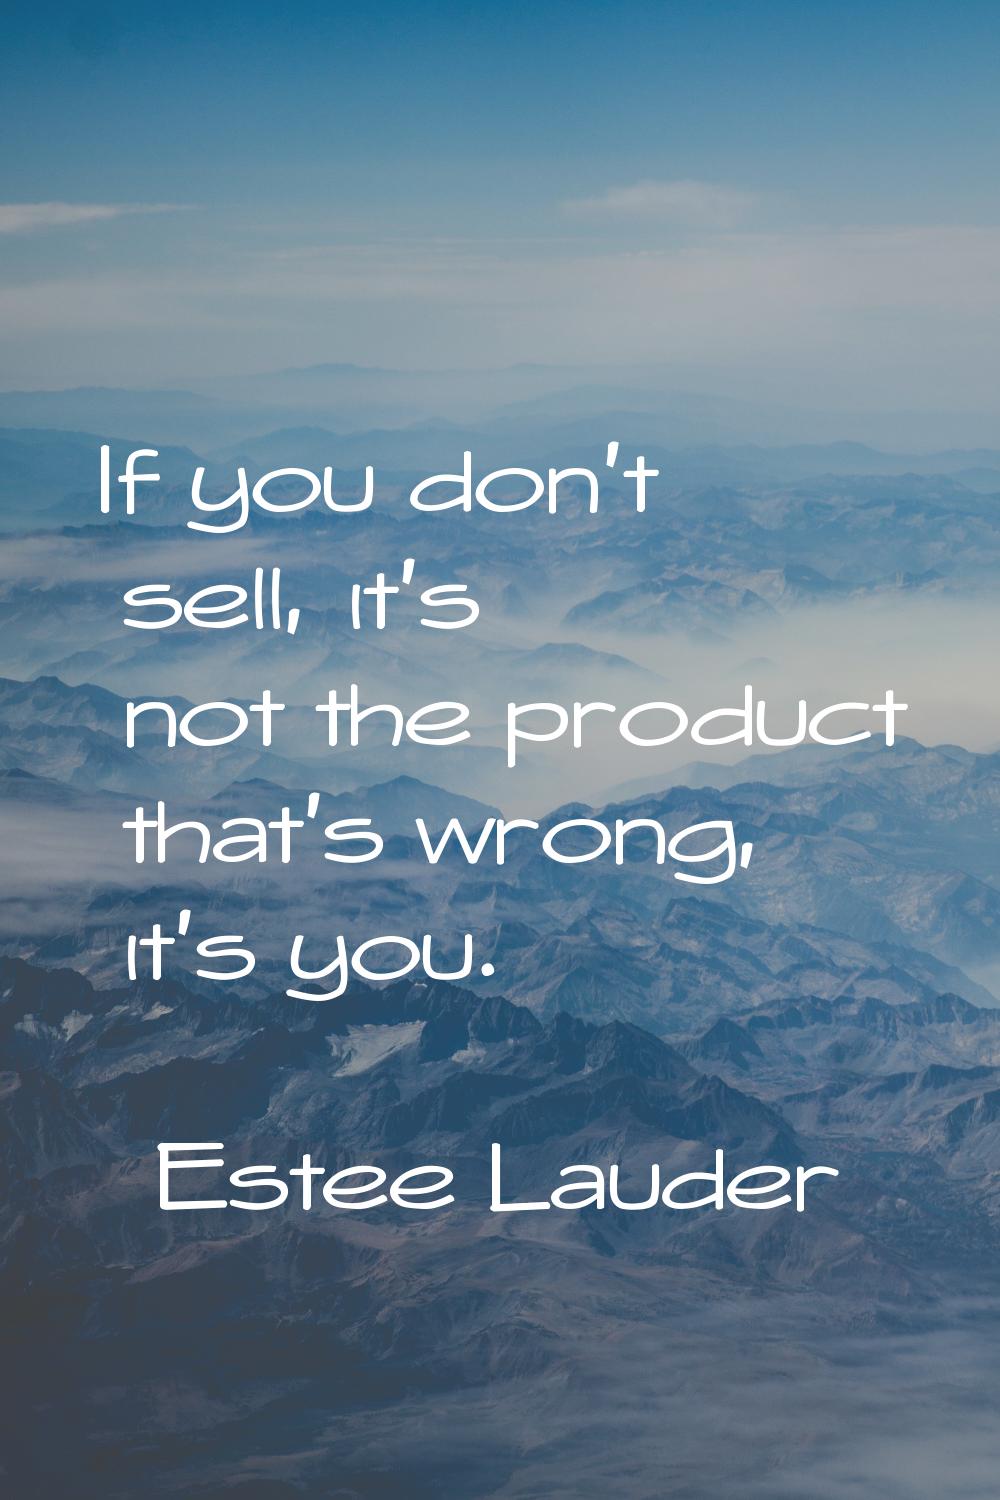 If you don't sell, it's not the product that's wrong, it's you.